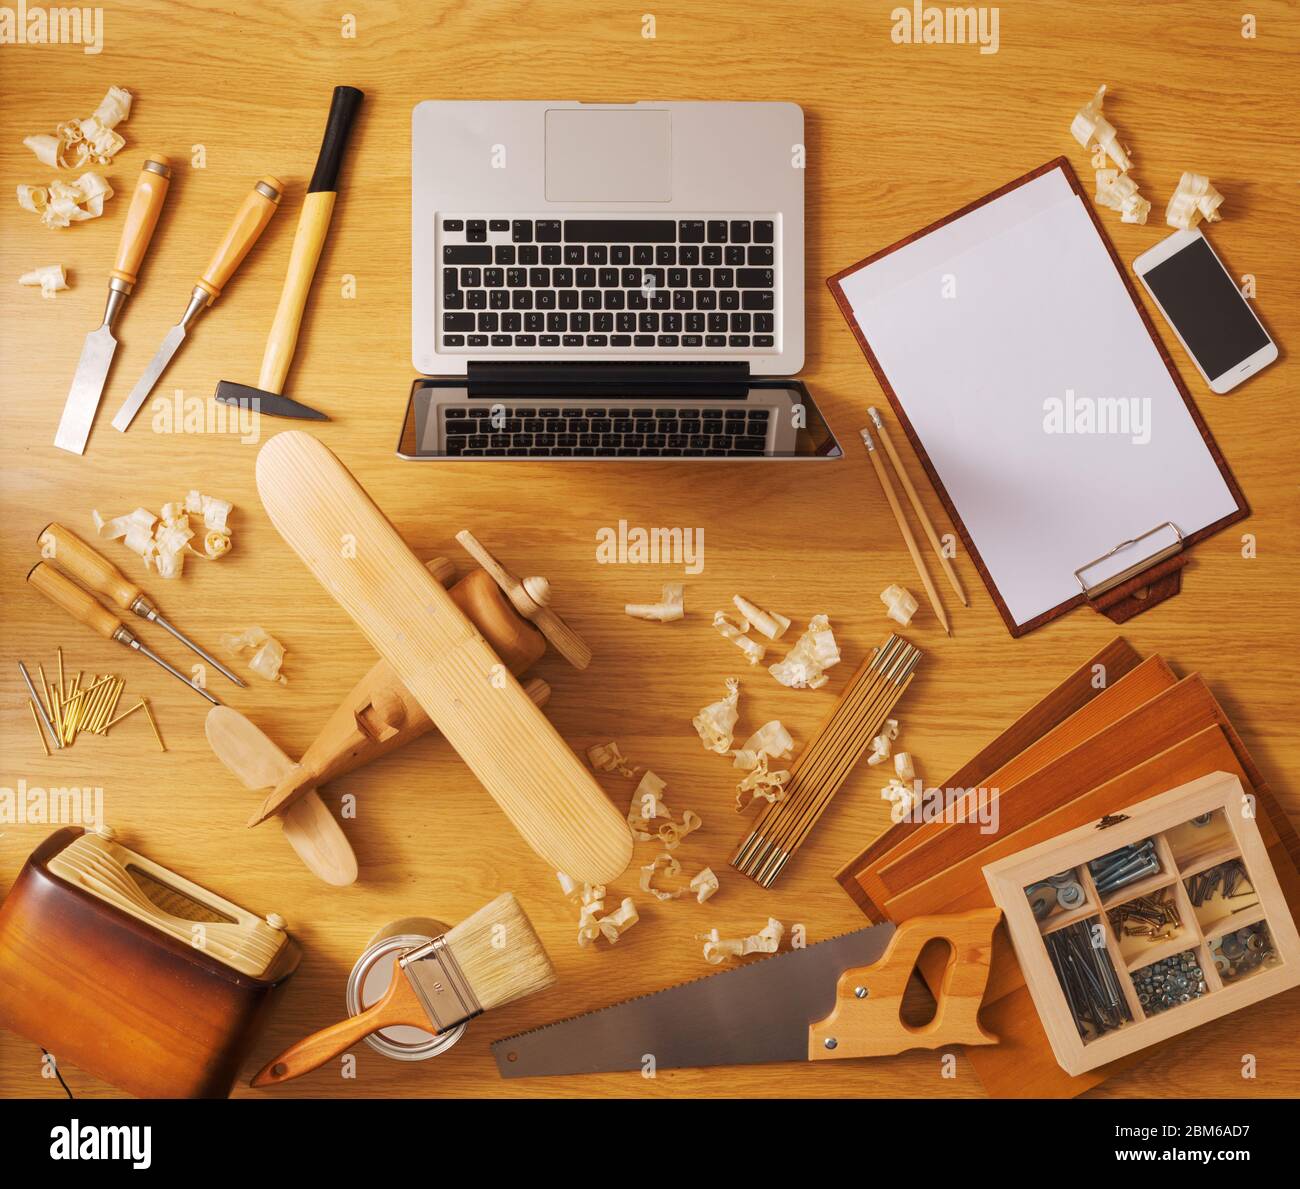 DIY project at home concept, work table with handmade wooden toy airplane and carpentry work tools, top view Stock Photo